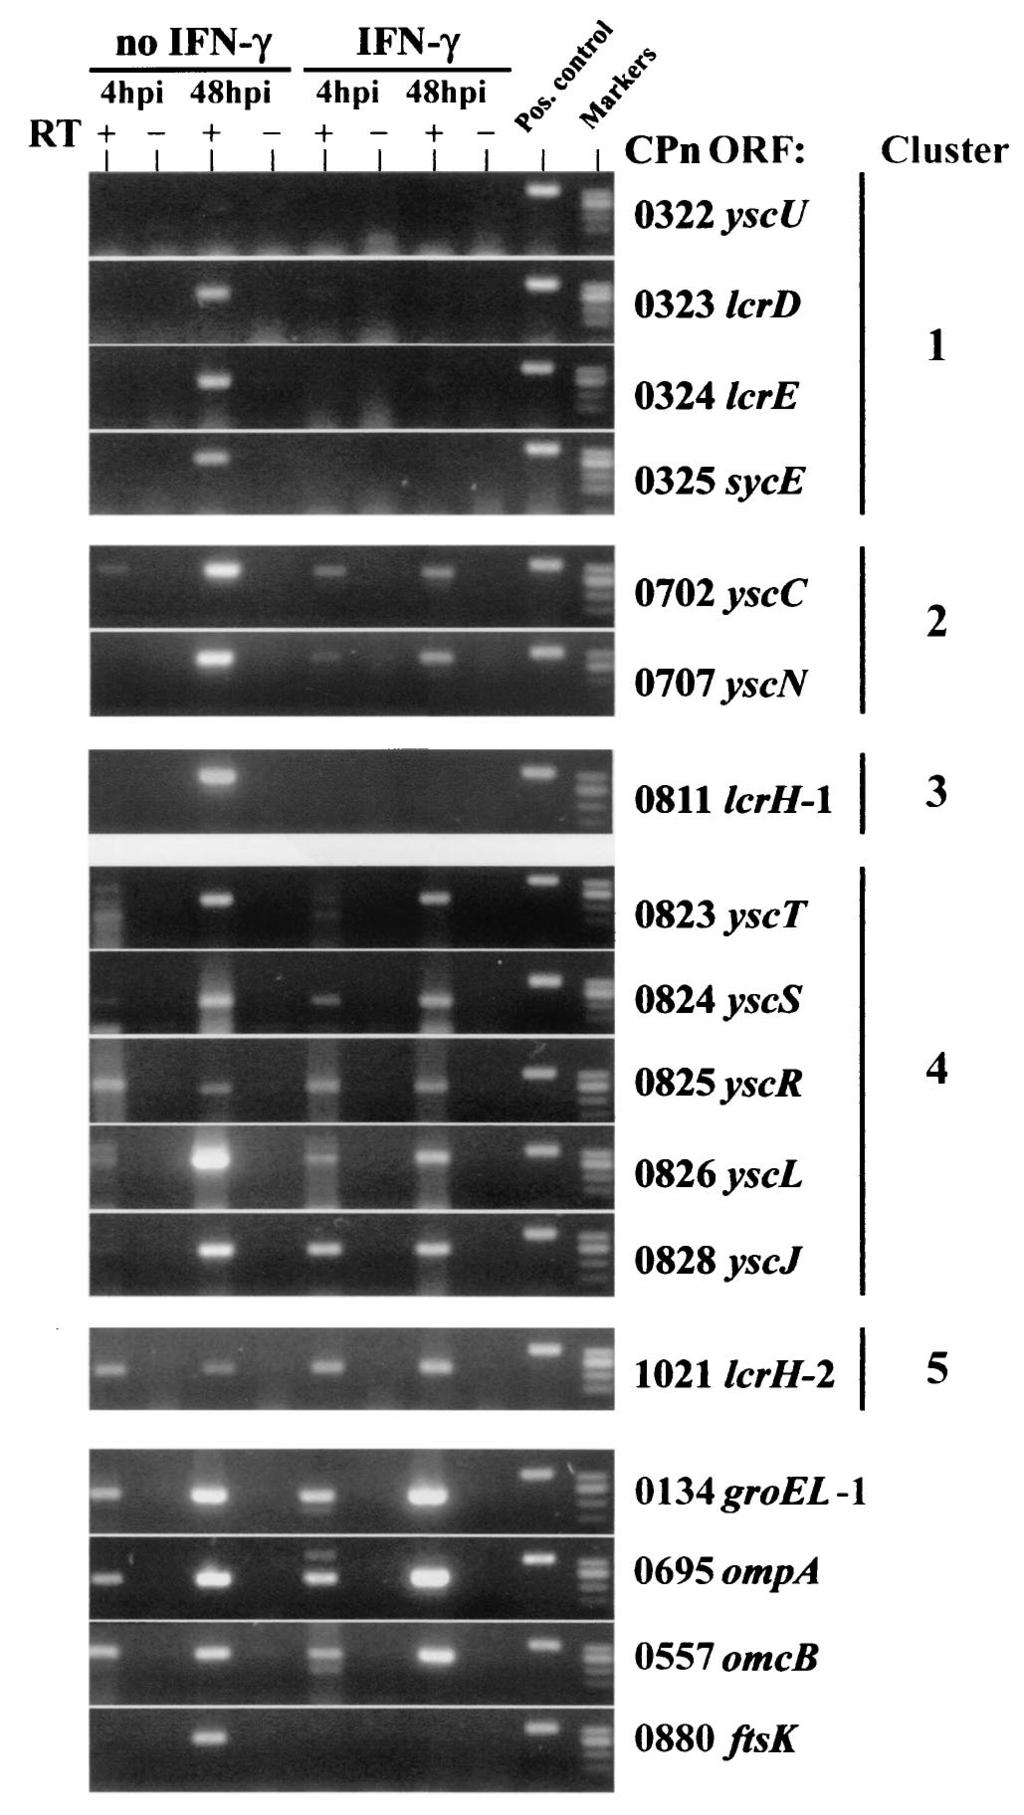 2560 SLEPENKIN ET AL. INFECT. IMMUN. FIG. 5. HEp-2 cells were infected with C. pneumoniae CM-1 with and without IFN- (40 ng/ml). Infected monolayers were incubated at 37 C, and at 4 and 48 h p.i., cells were harvested and RNA was isolated.